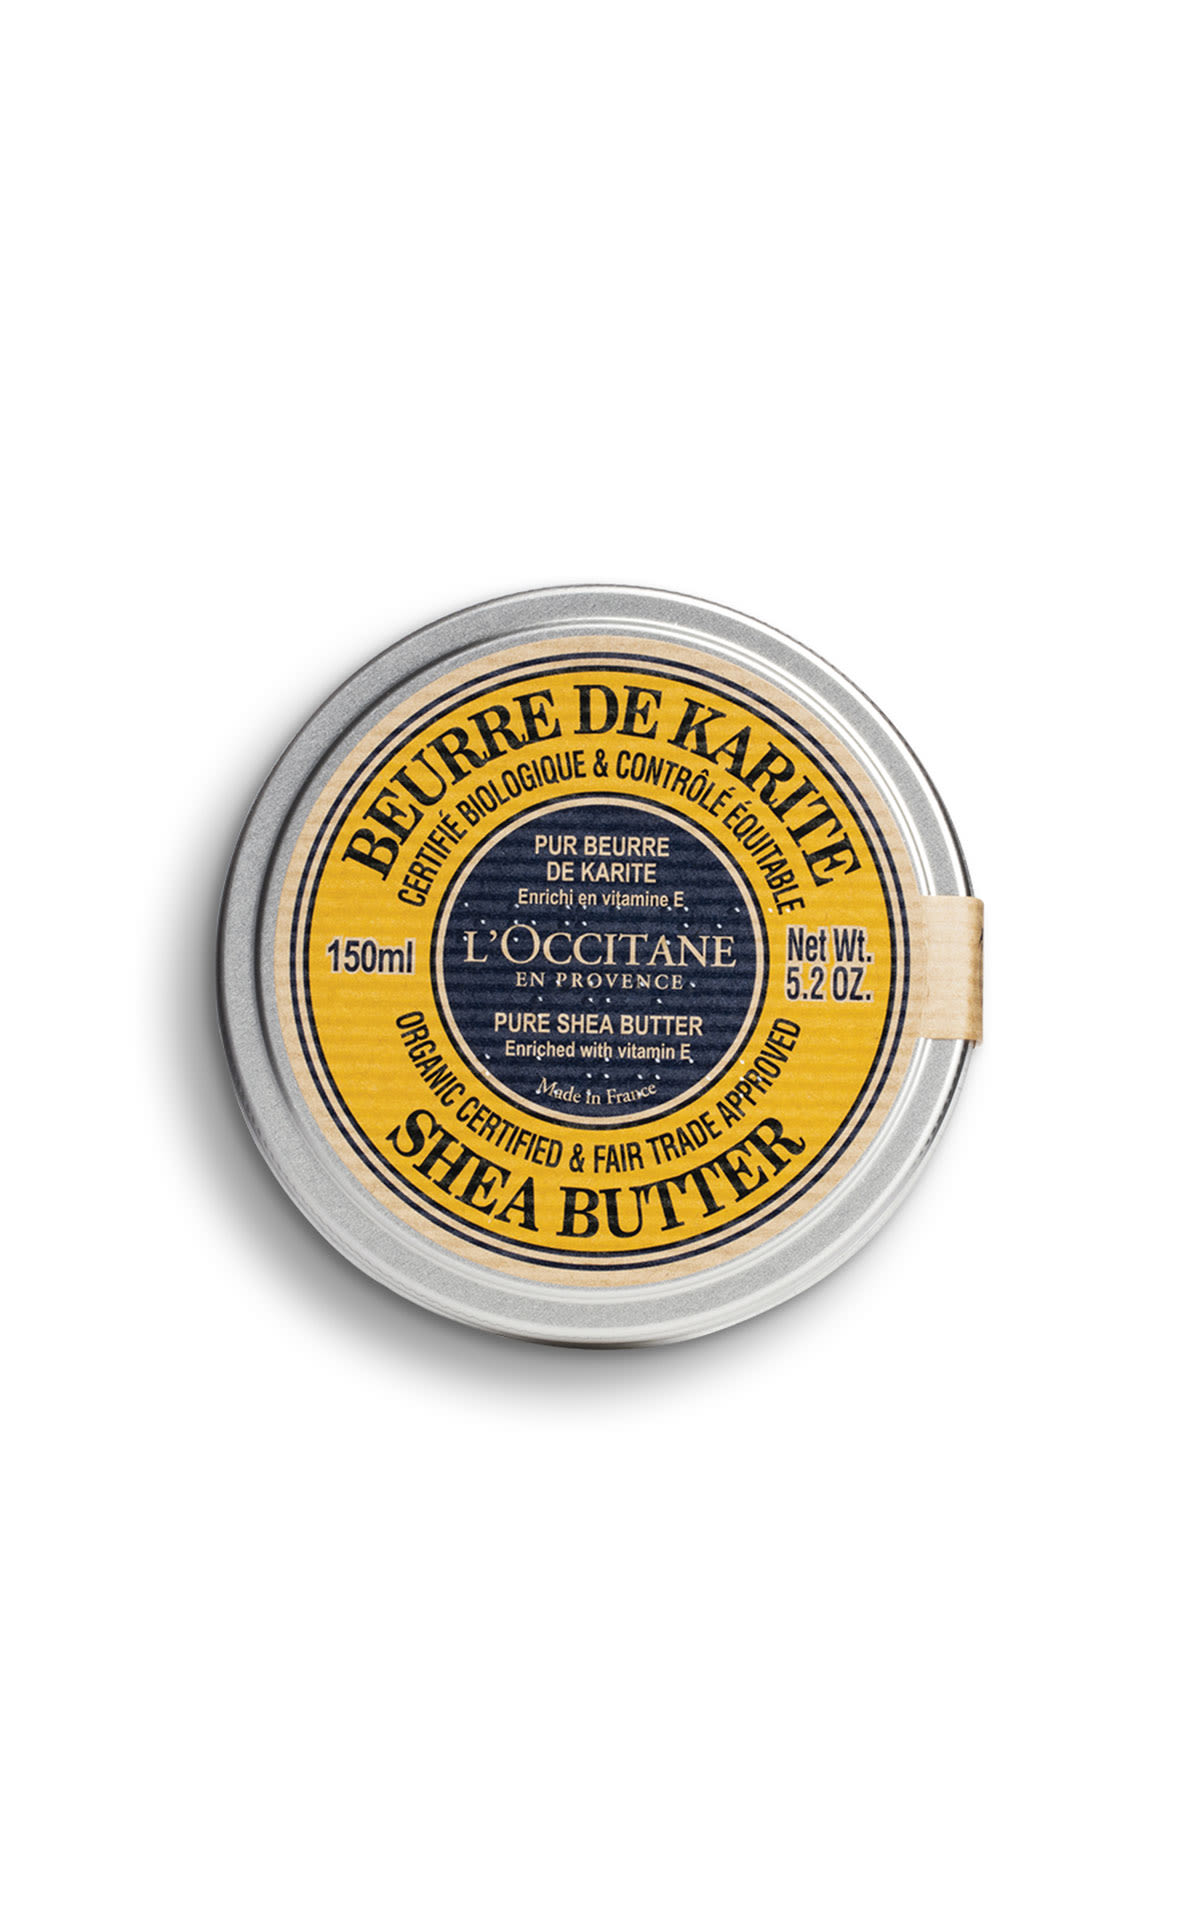 L'Occitane en Provence Organic pure shea butter from Bicester Village